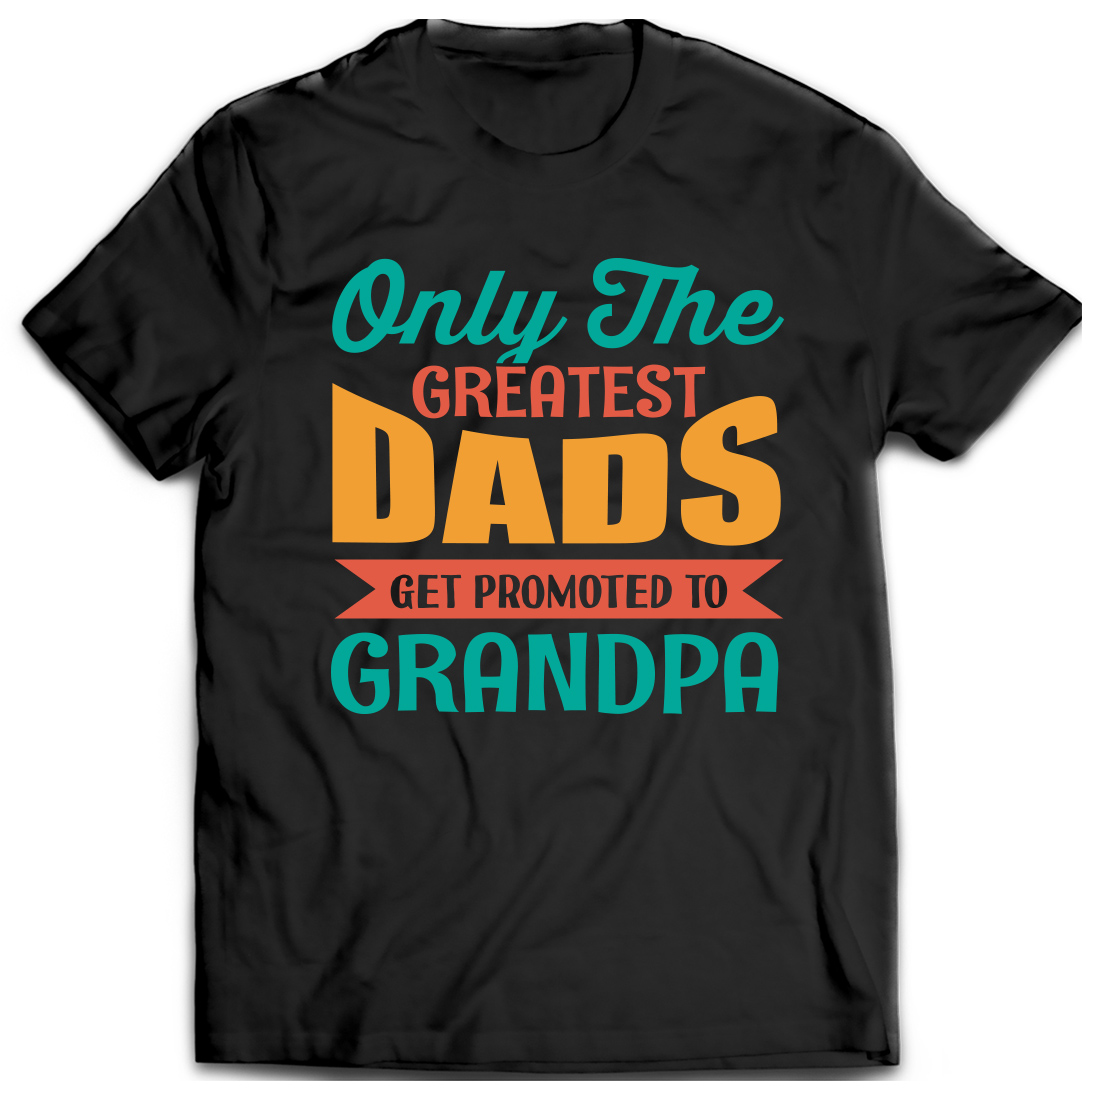 Only the Greatest Dad Get Promoted T-shirt Design cover image.